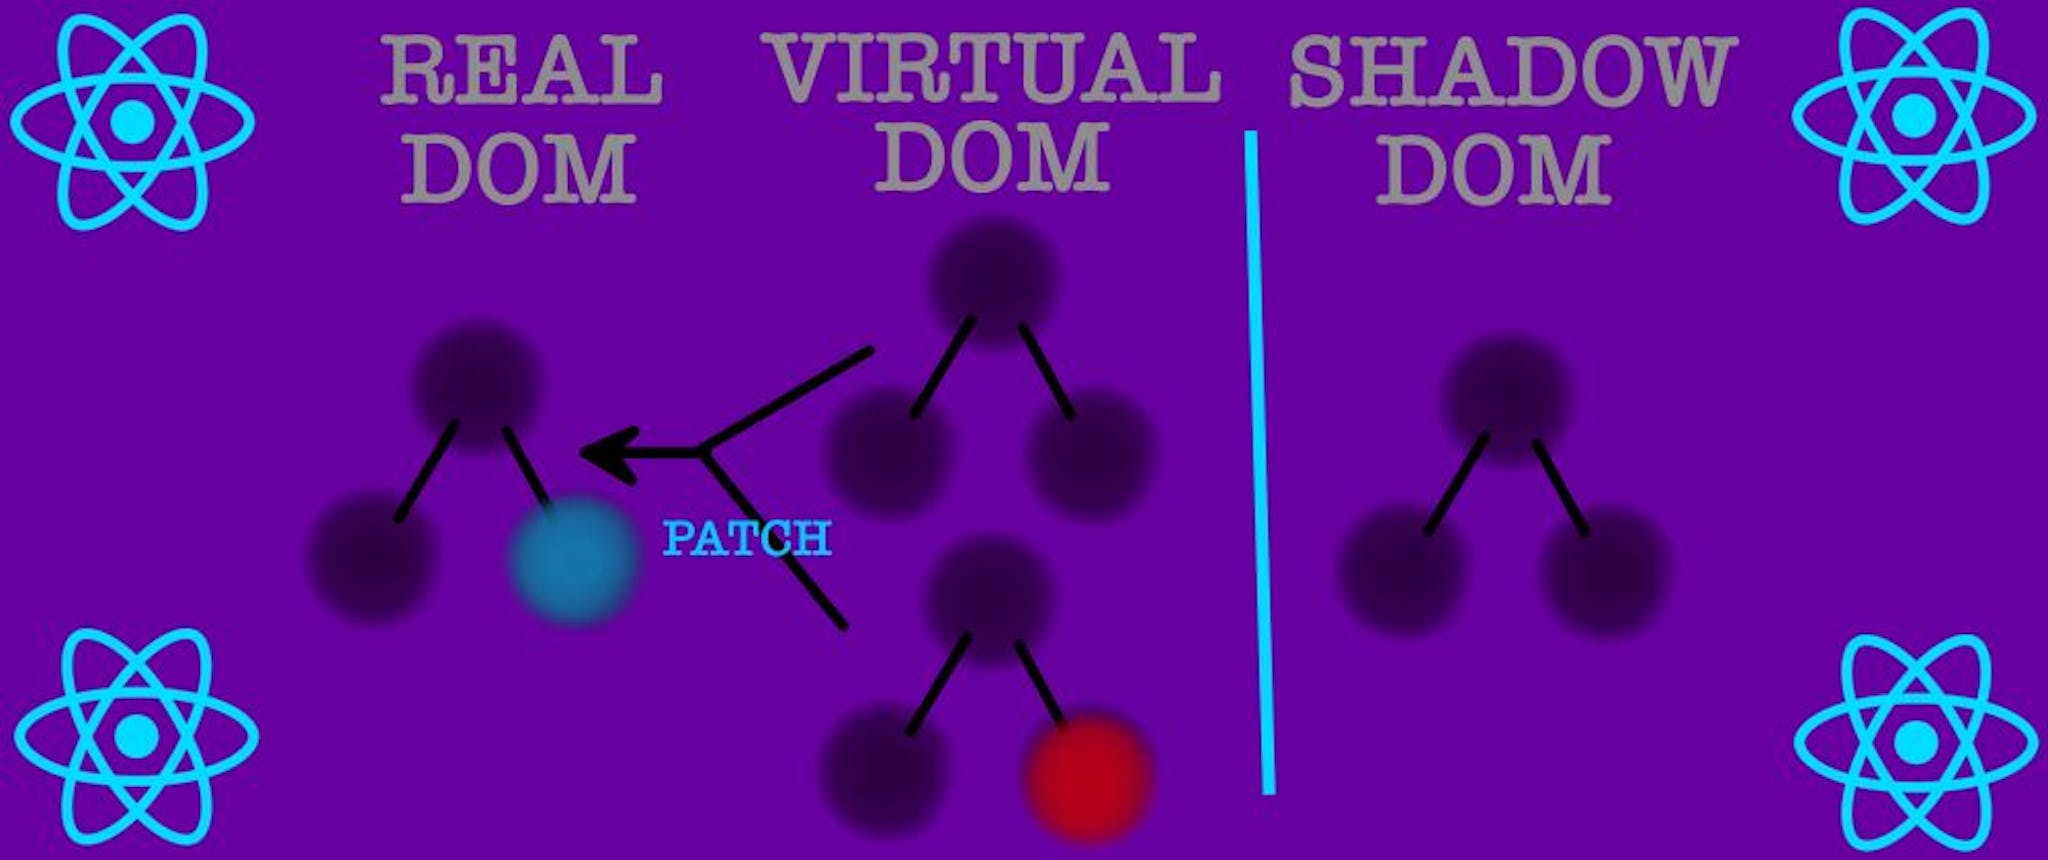 featured image - Real DOM, Virtual DOM, and Shadow DOM: What's the Difference?